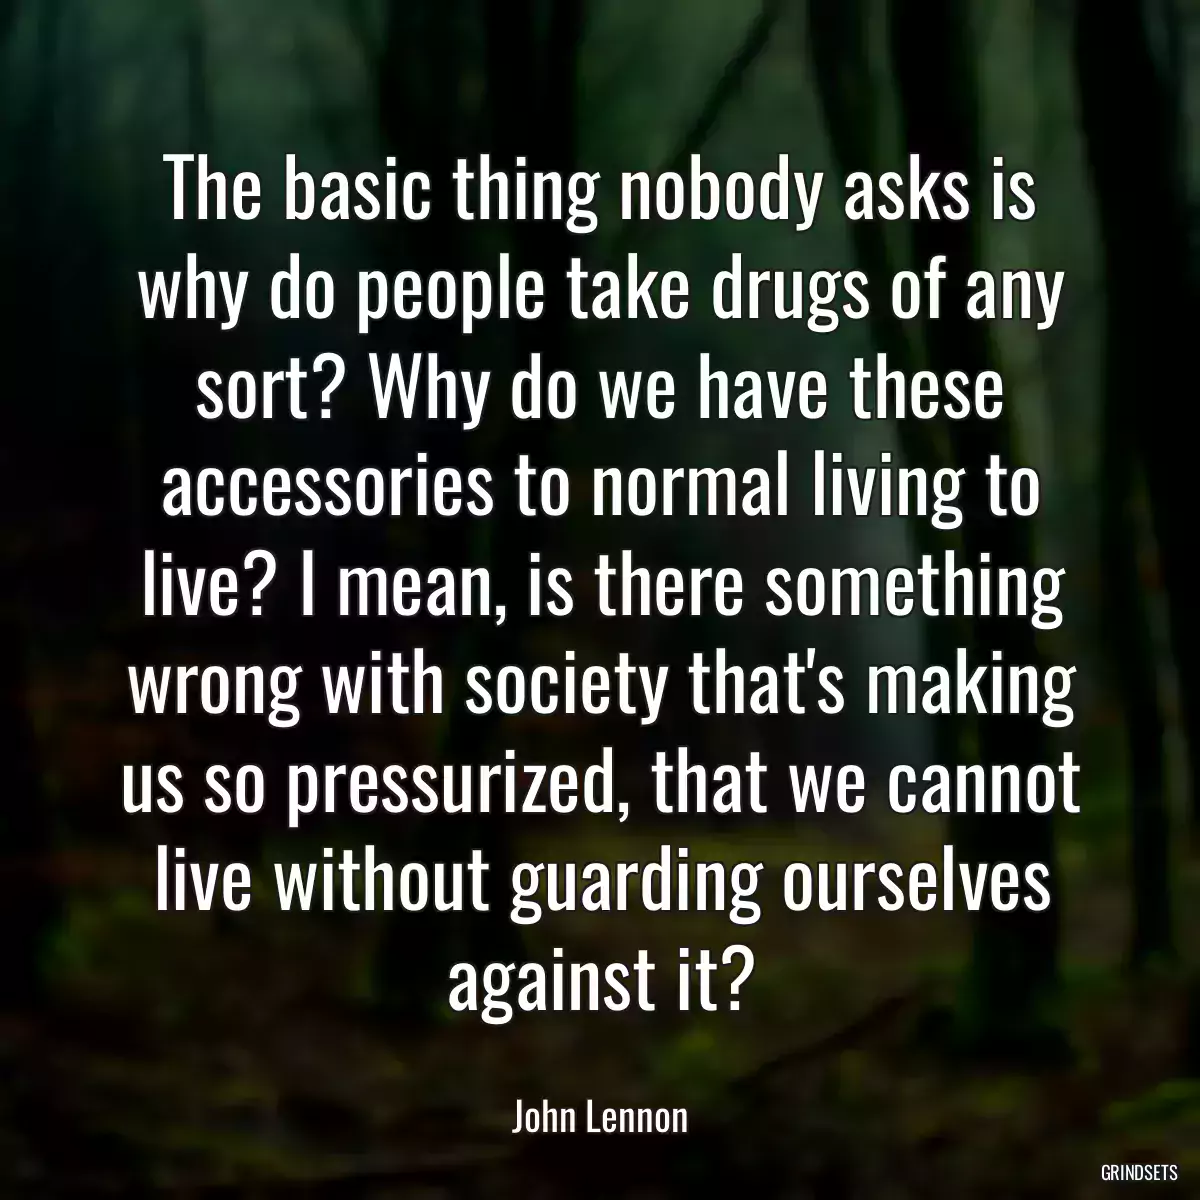 The basic thing nobody asks is why do people take drugs of any sort? Why do we have these accessories to normal living to live? I mean, is there something wrong with society that\'s making us so pressurized, that we cannot live without guarding ourselves against it?